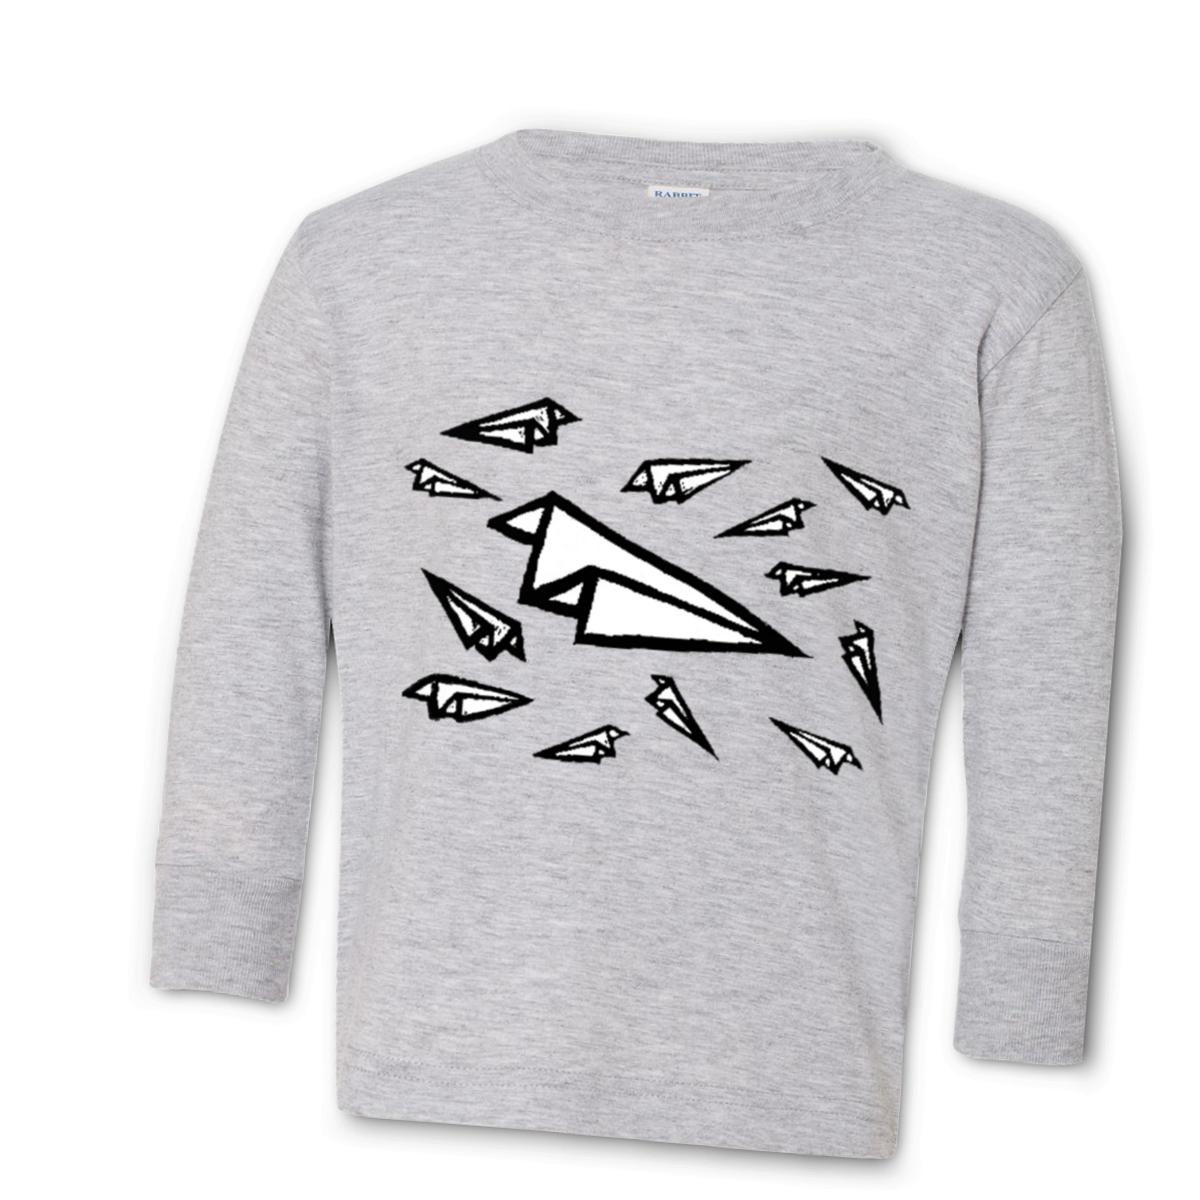 Airplane Frenzy Toddler Long Sleeve Tee 56T heather